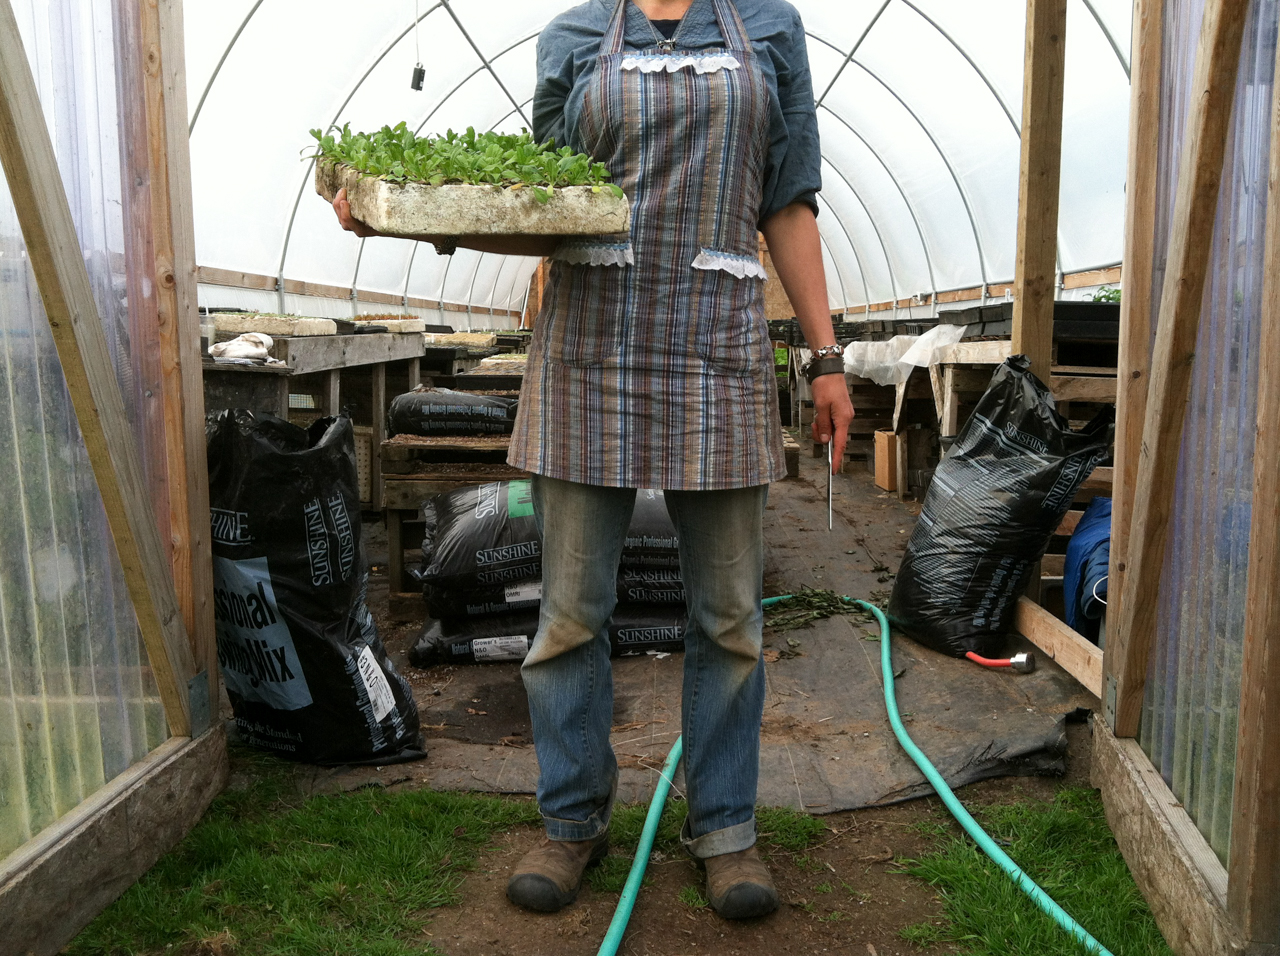 Erin Benzakein holds a tray of seedlings outside the greenhouse